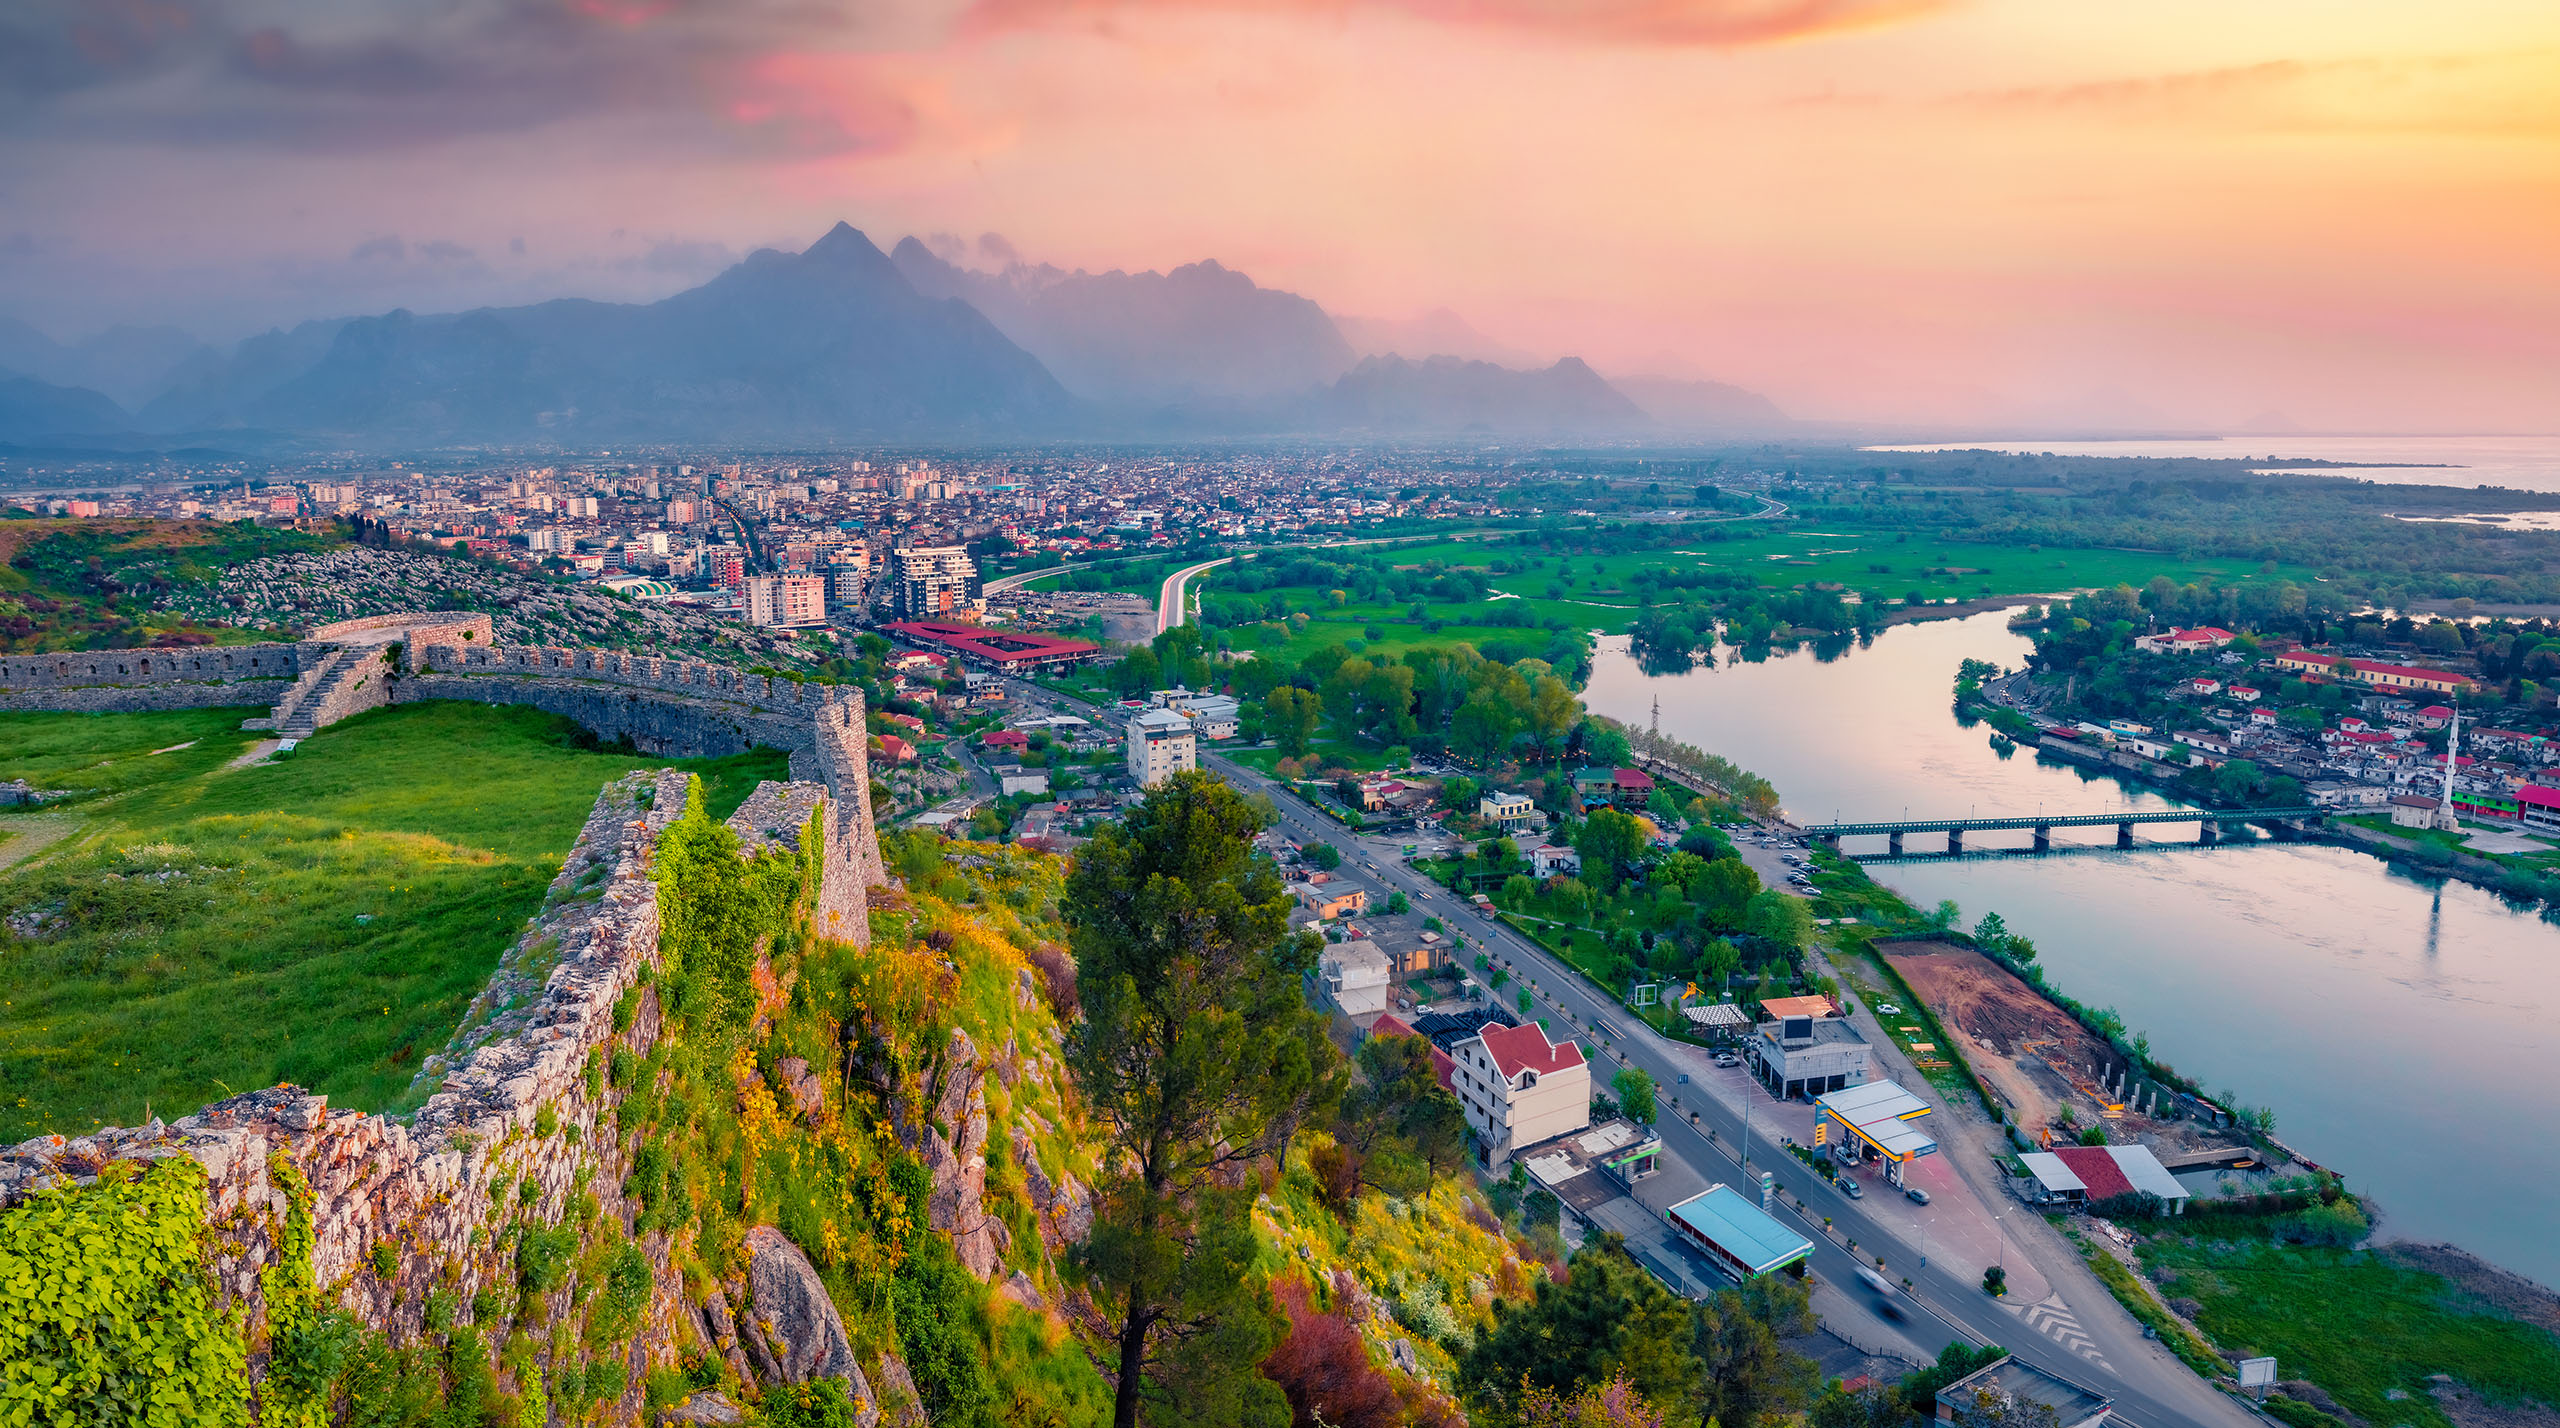 Breathtaking evening view of Rozafa Castle. Astonishing spring cityscape of Shkoder town. Spectacular outdoor scene of Albania, Europe. Traveling concept background.